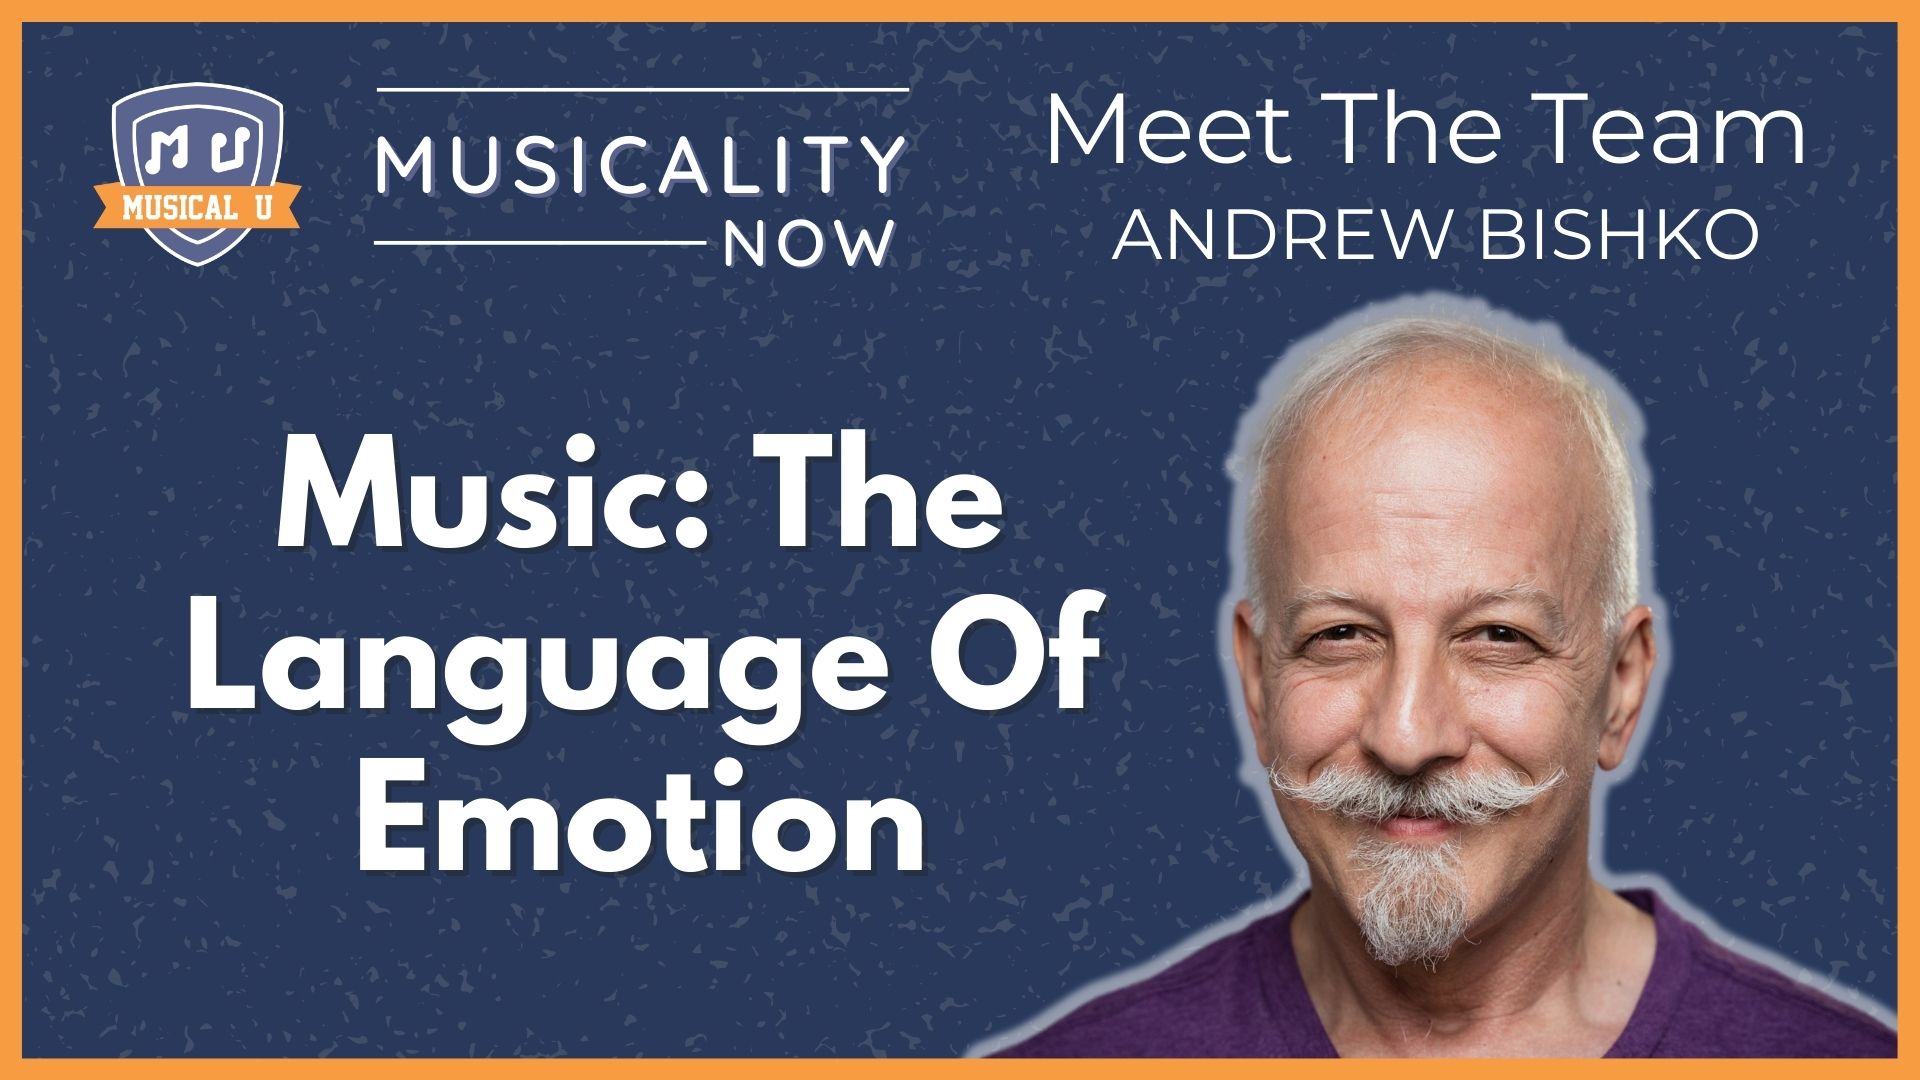 Music: The Language Of Emotion (Meet The Team with Andrew Bishko, Head Educator)